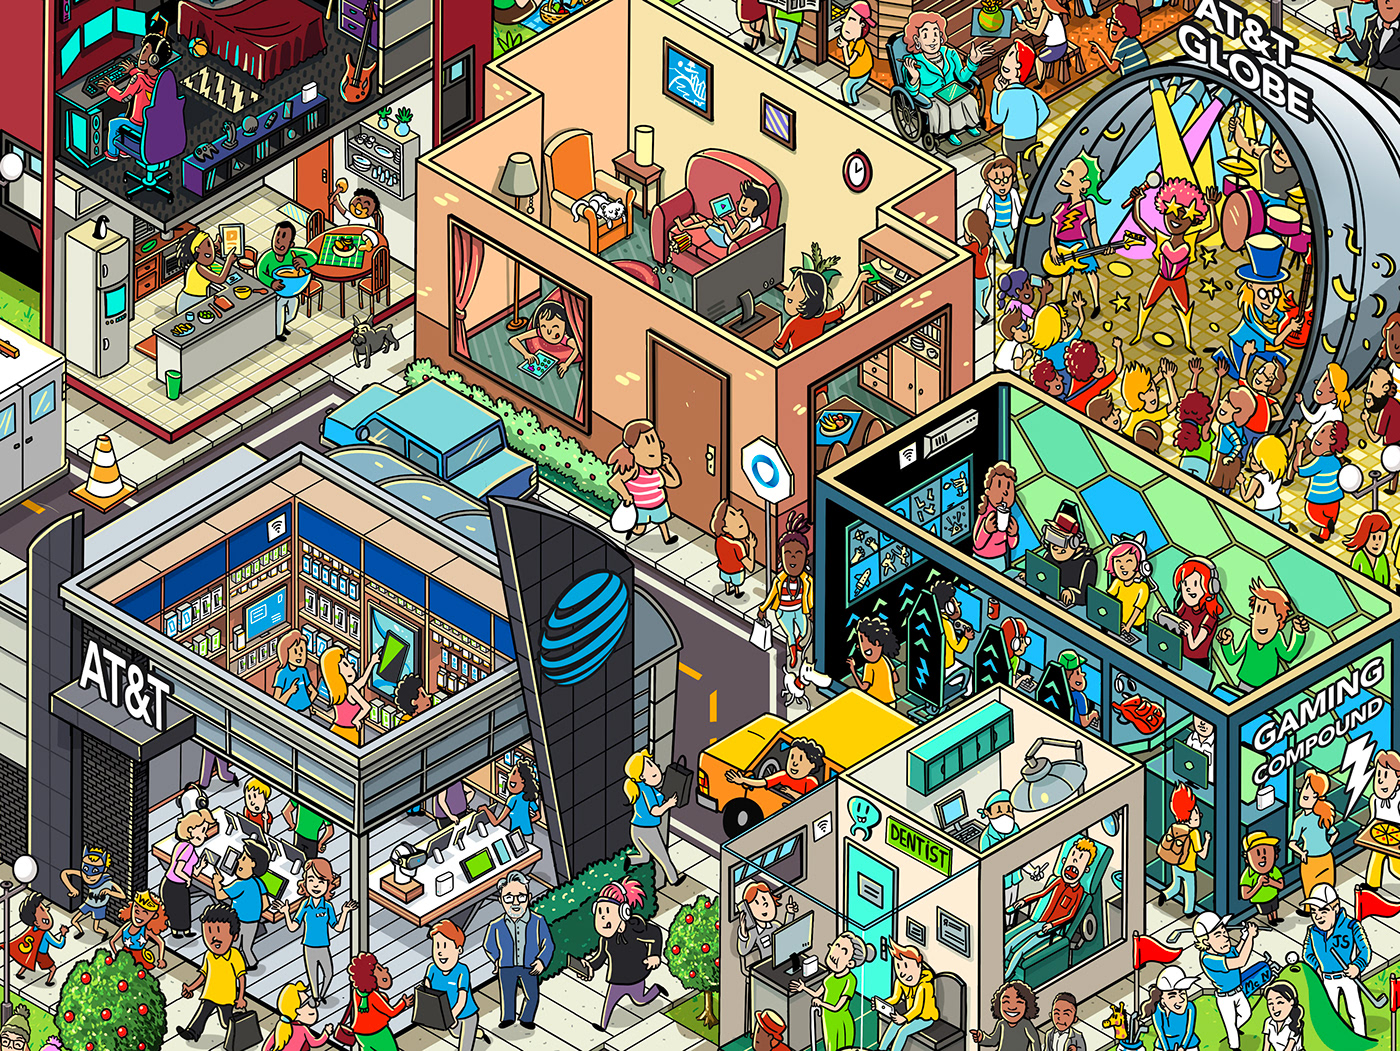 seek-and-find wheres waldo wheres wally Isometric Internet Technology detailed colorful Web search-and-find